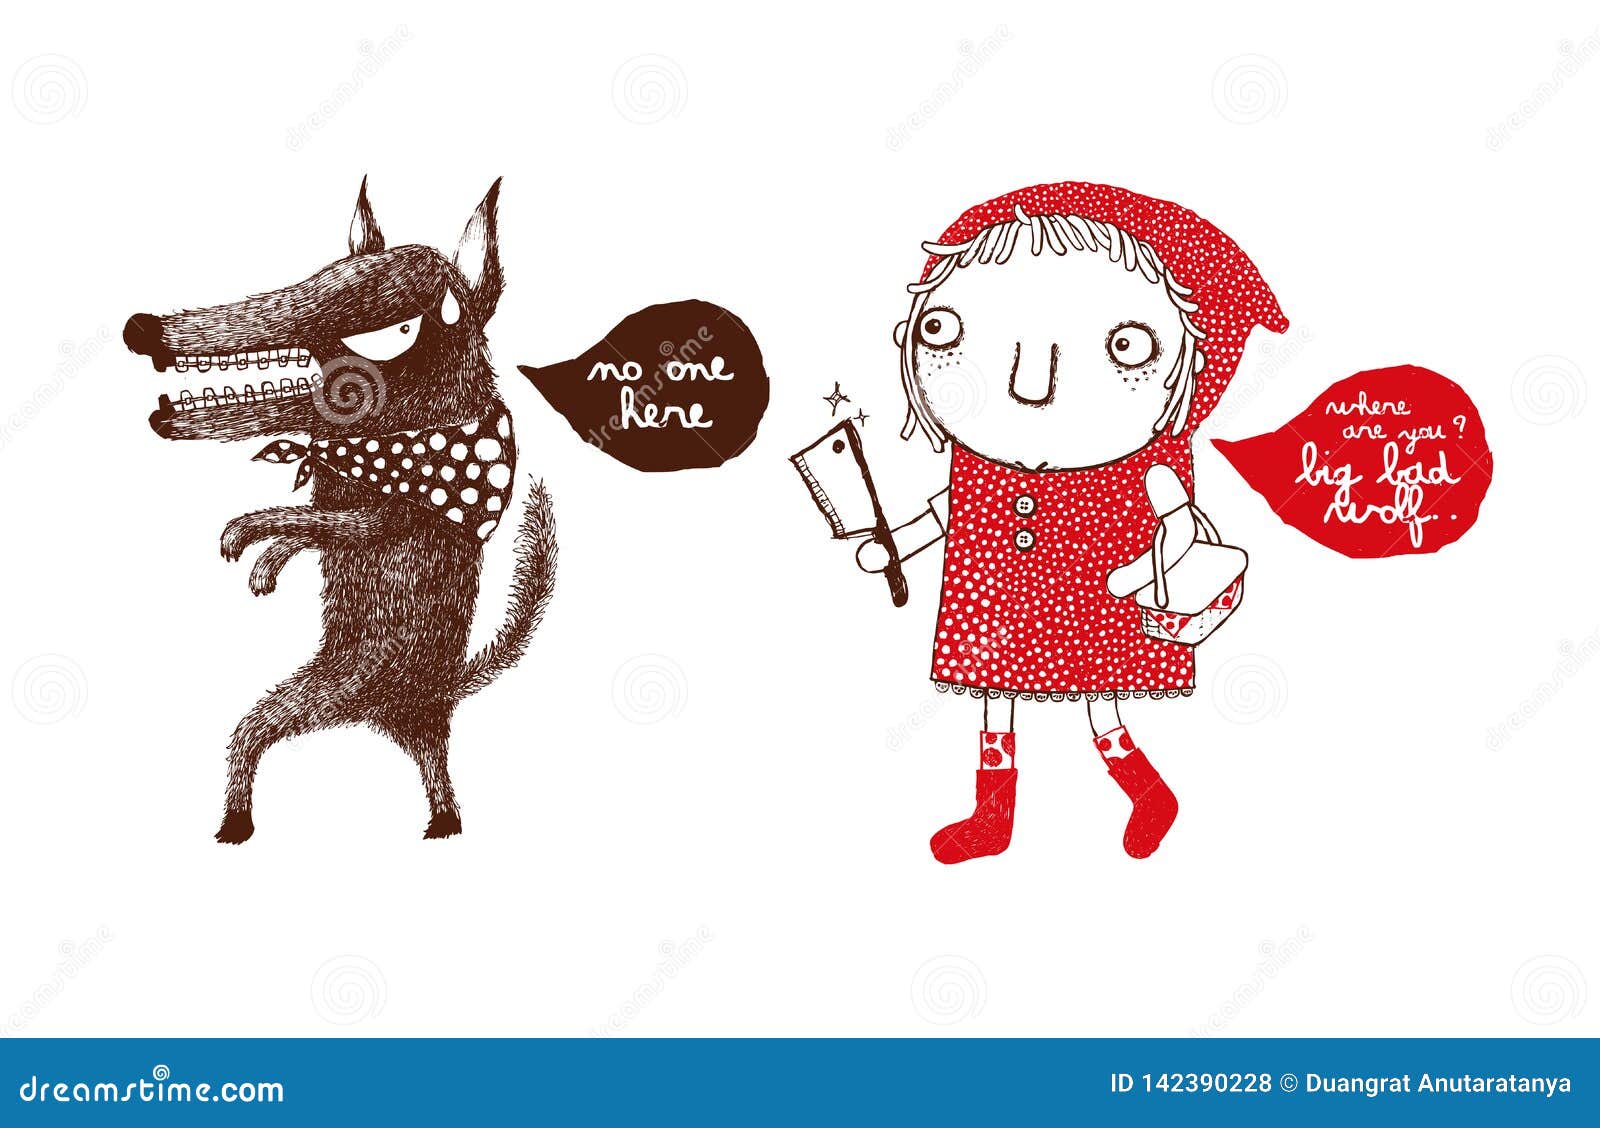 Red Riding Hood And The Big Bad Wolf Revenge Of The Red Riding Hood Wolf Hide And Seek Vector Stock Vector Illustration Of Girl Animals